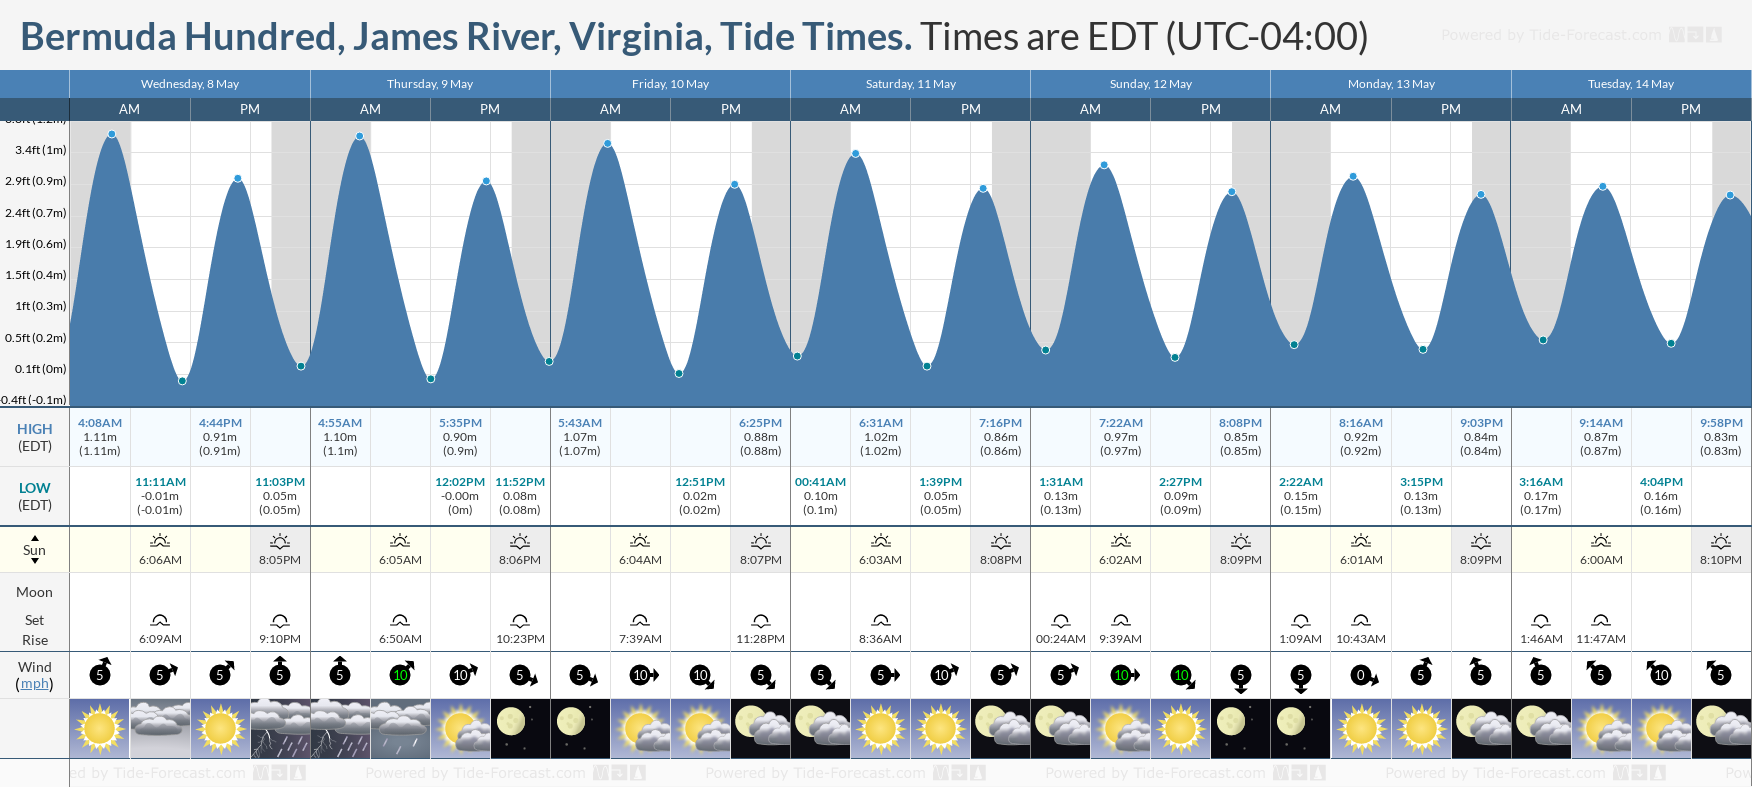 Bermuda Hundred, James River, Virginia Tide Chart including high and low tide tide times for the next 7 days